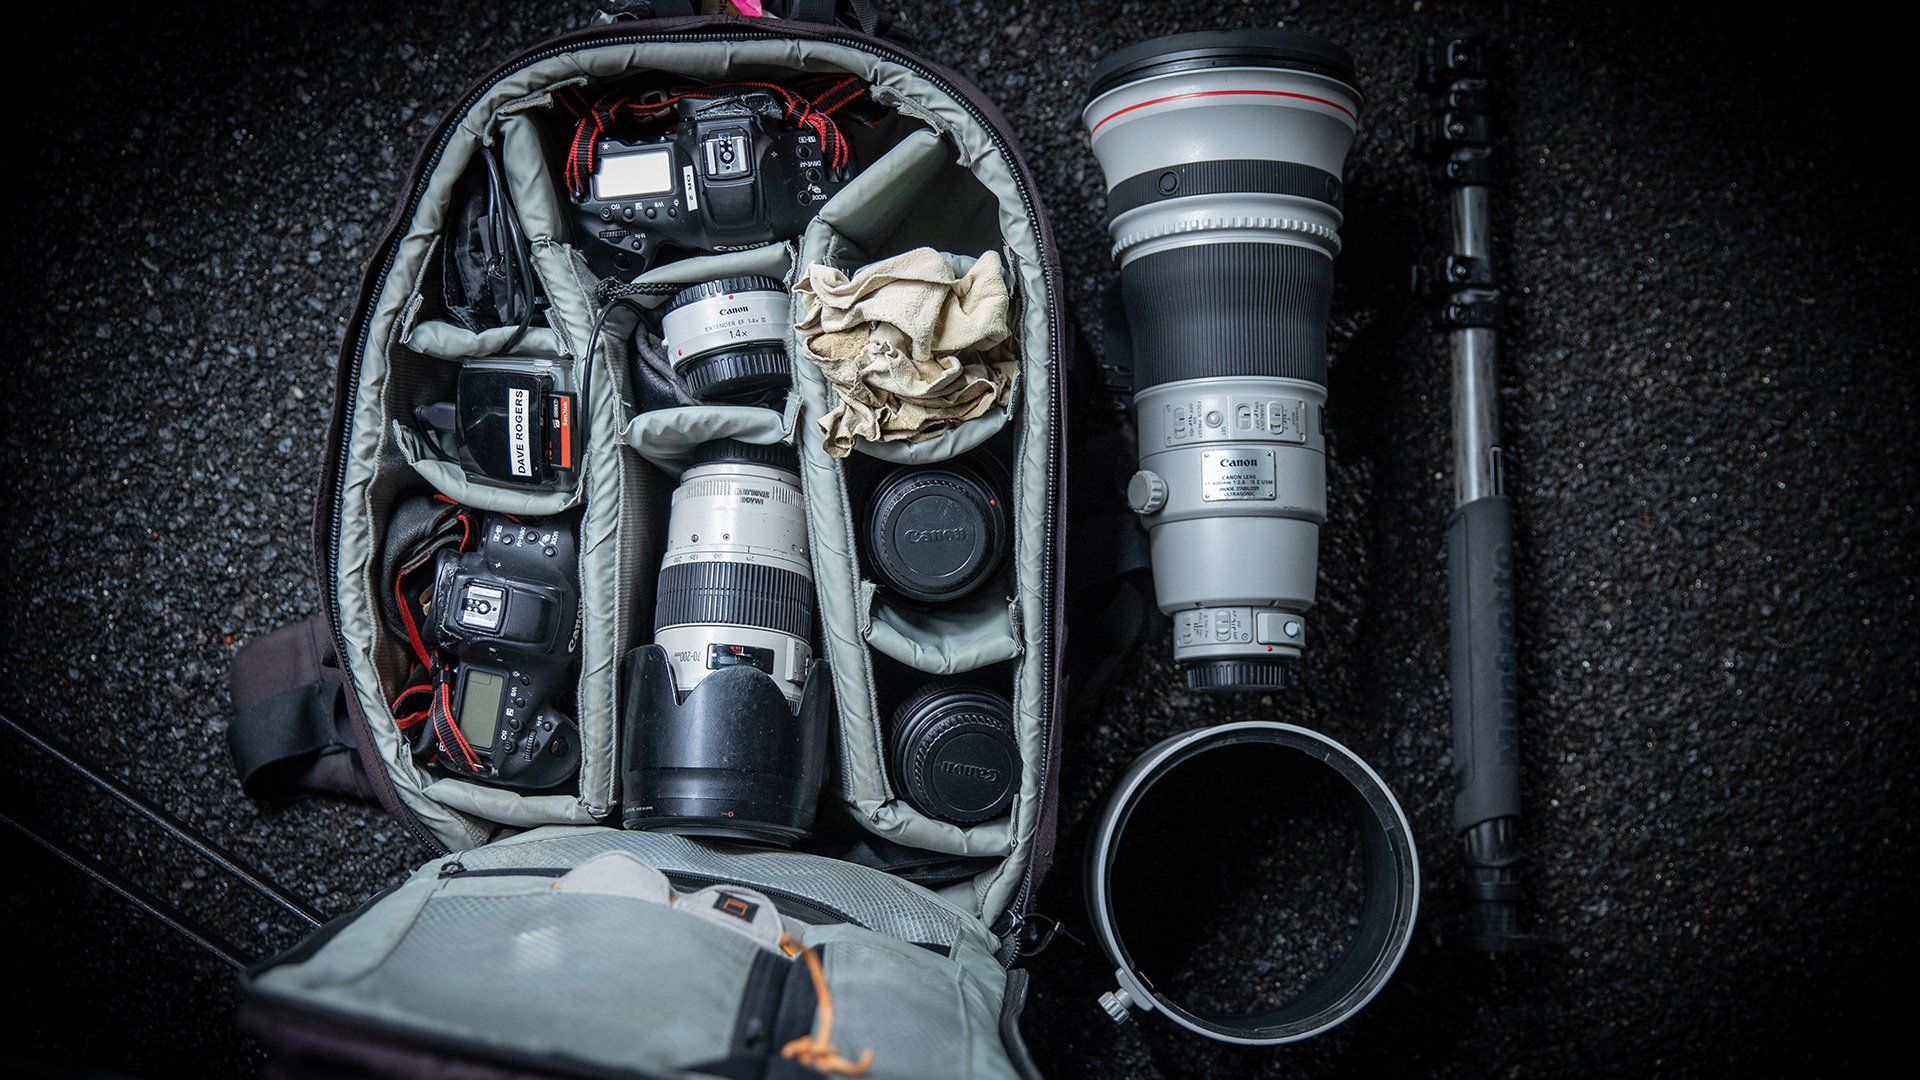 Dave Rogers' kitbag containing two Canon DSLR bodies and a number of lenses.